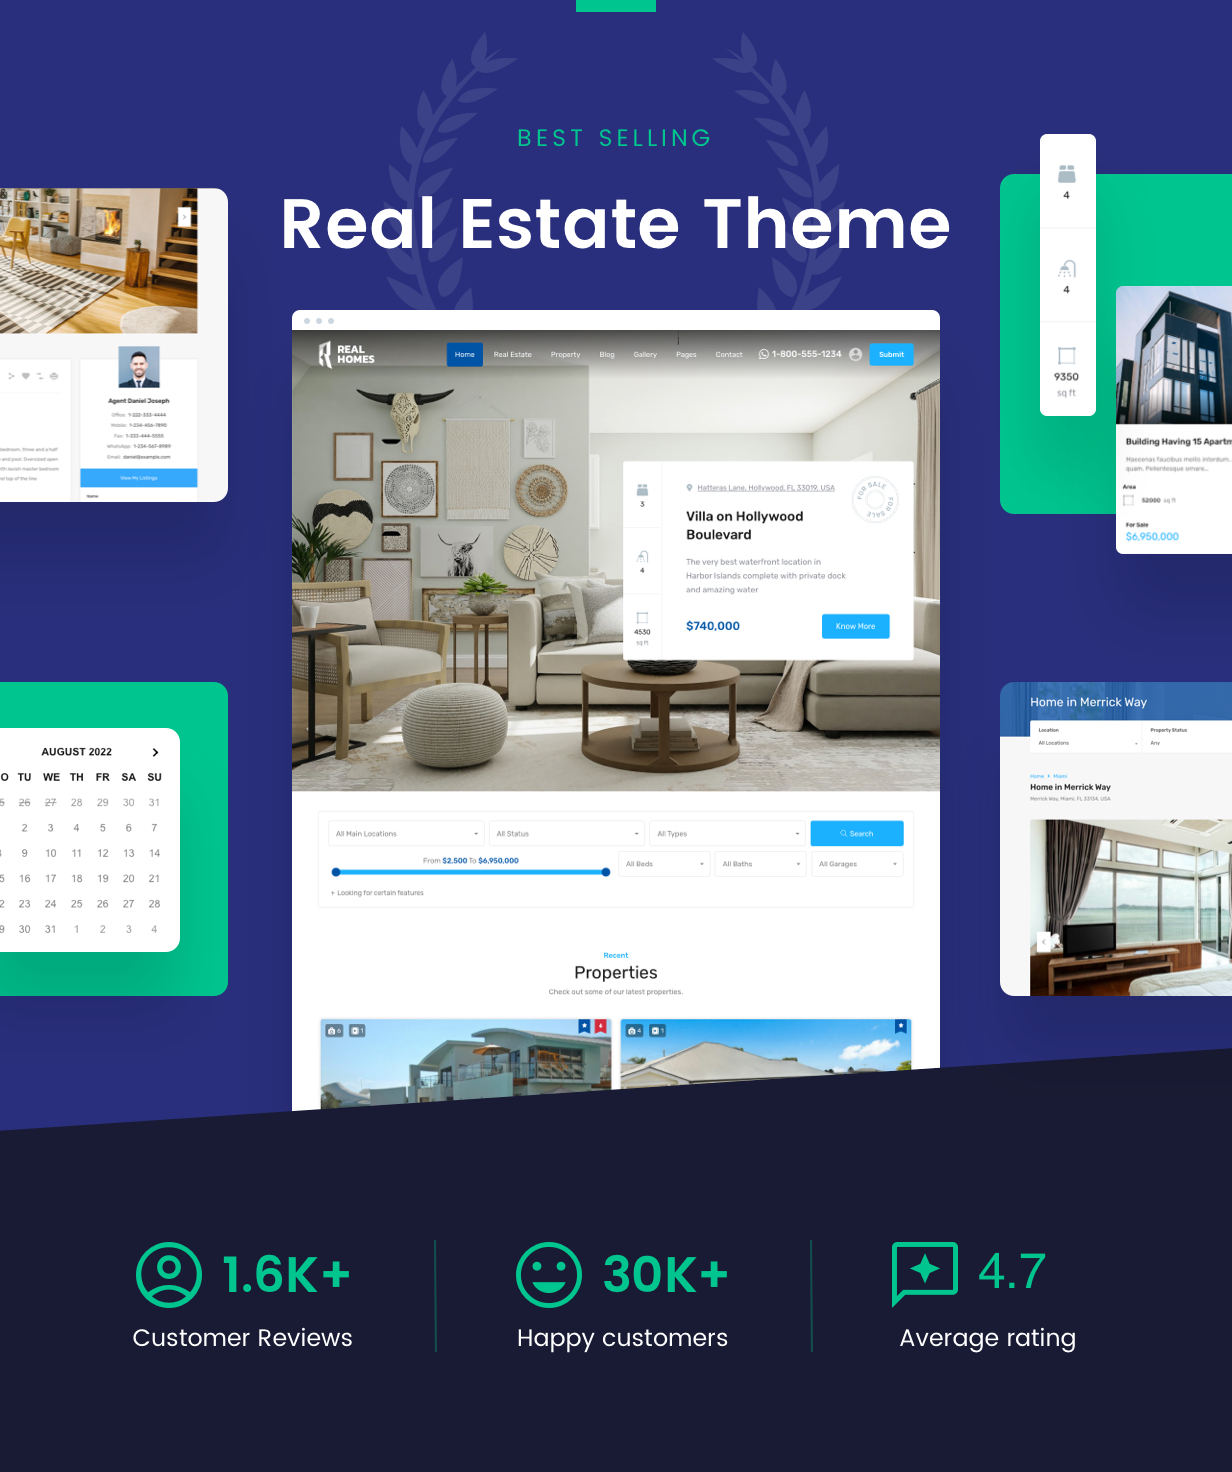 RealHomes is the number one selling Real Estate WordPress theme with sales above 30k